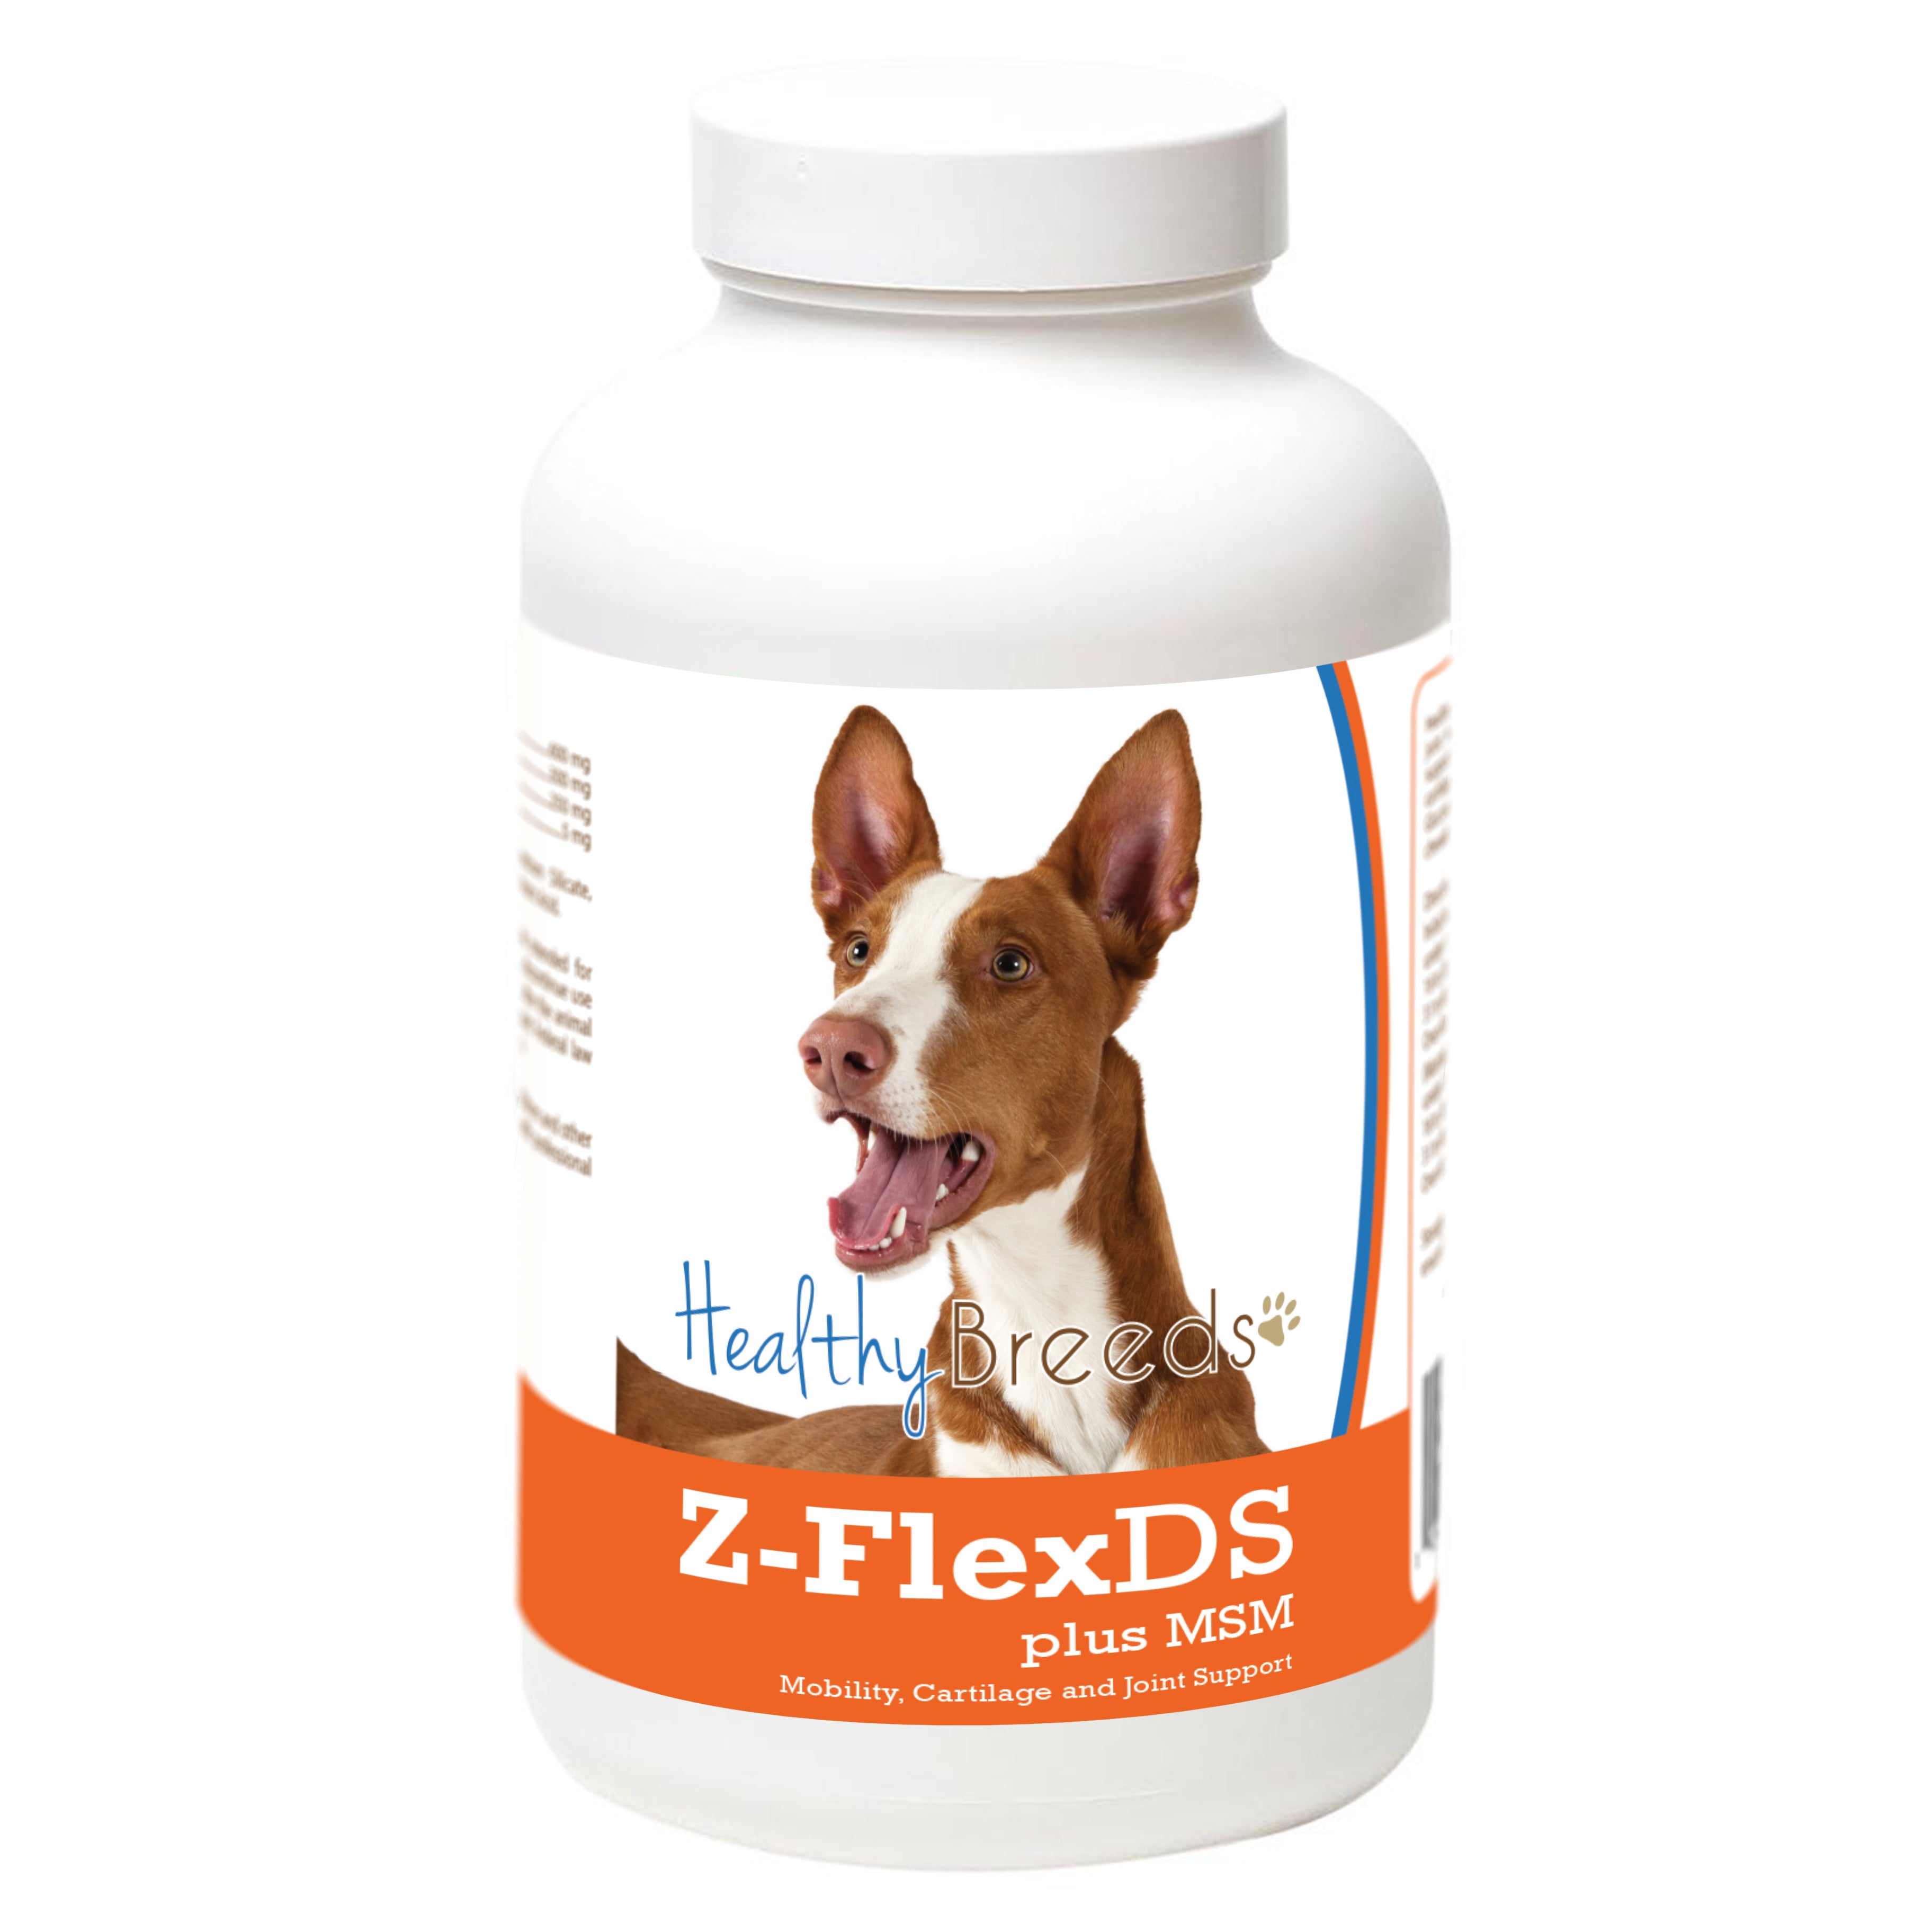 Ibizan Hound Z-FlexDS plus MSM Chewable Tablets 60 Count